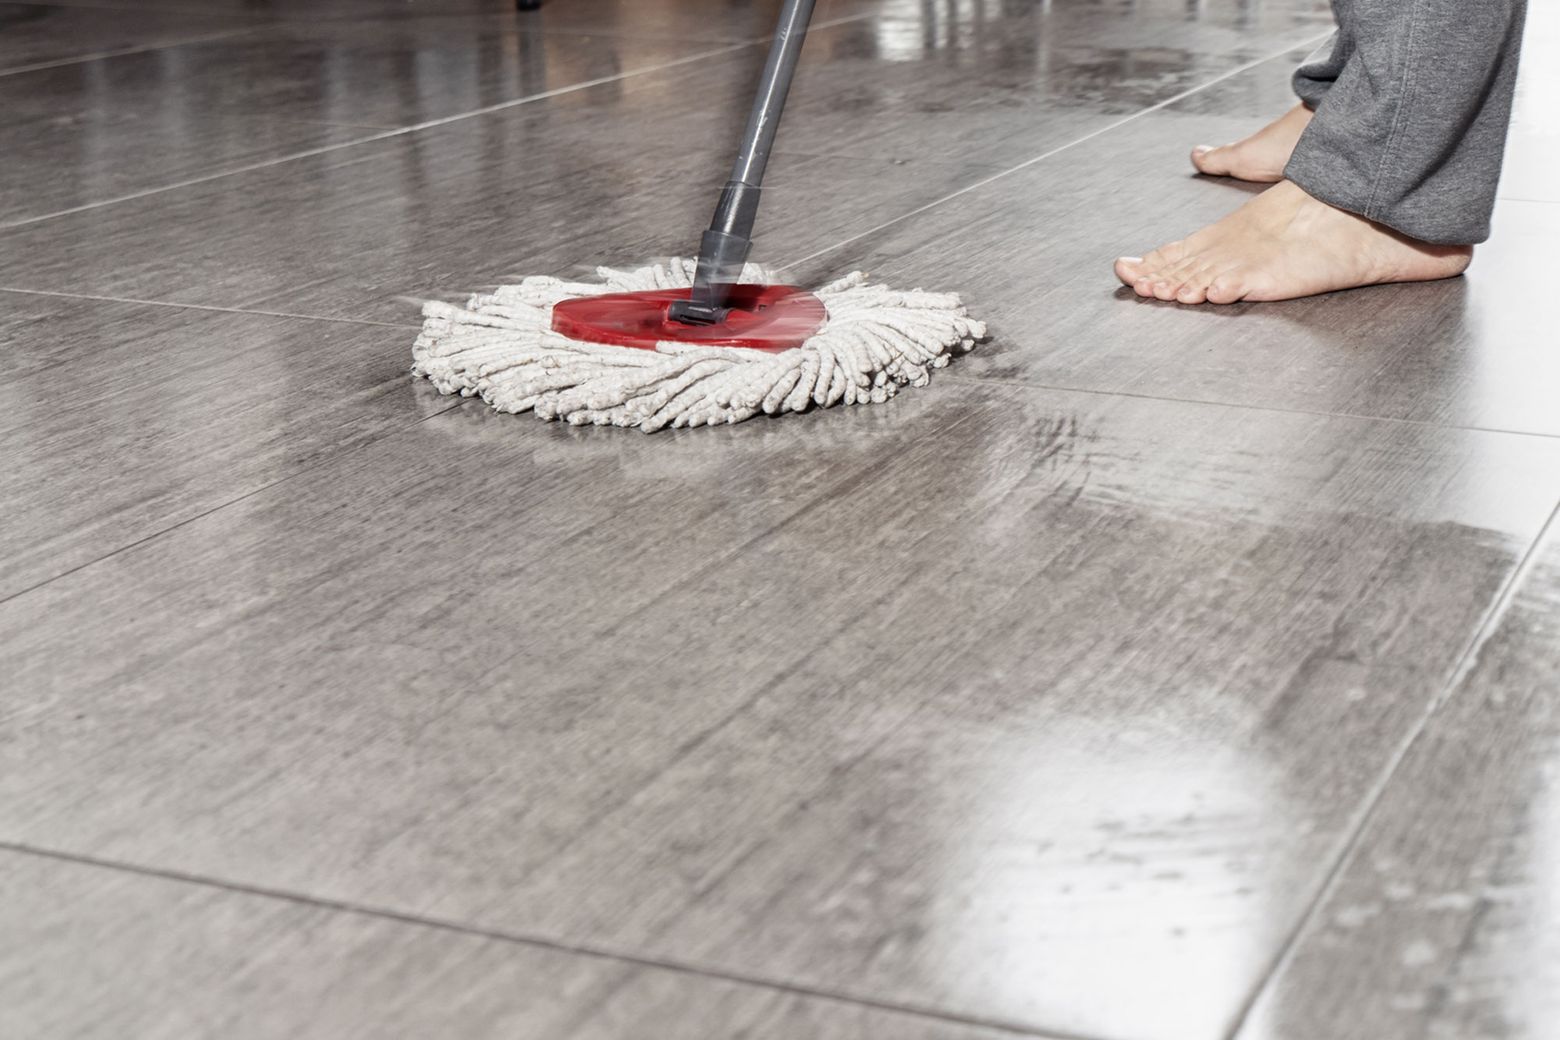 How To Fix A Squeaky Floor Without